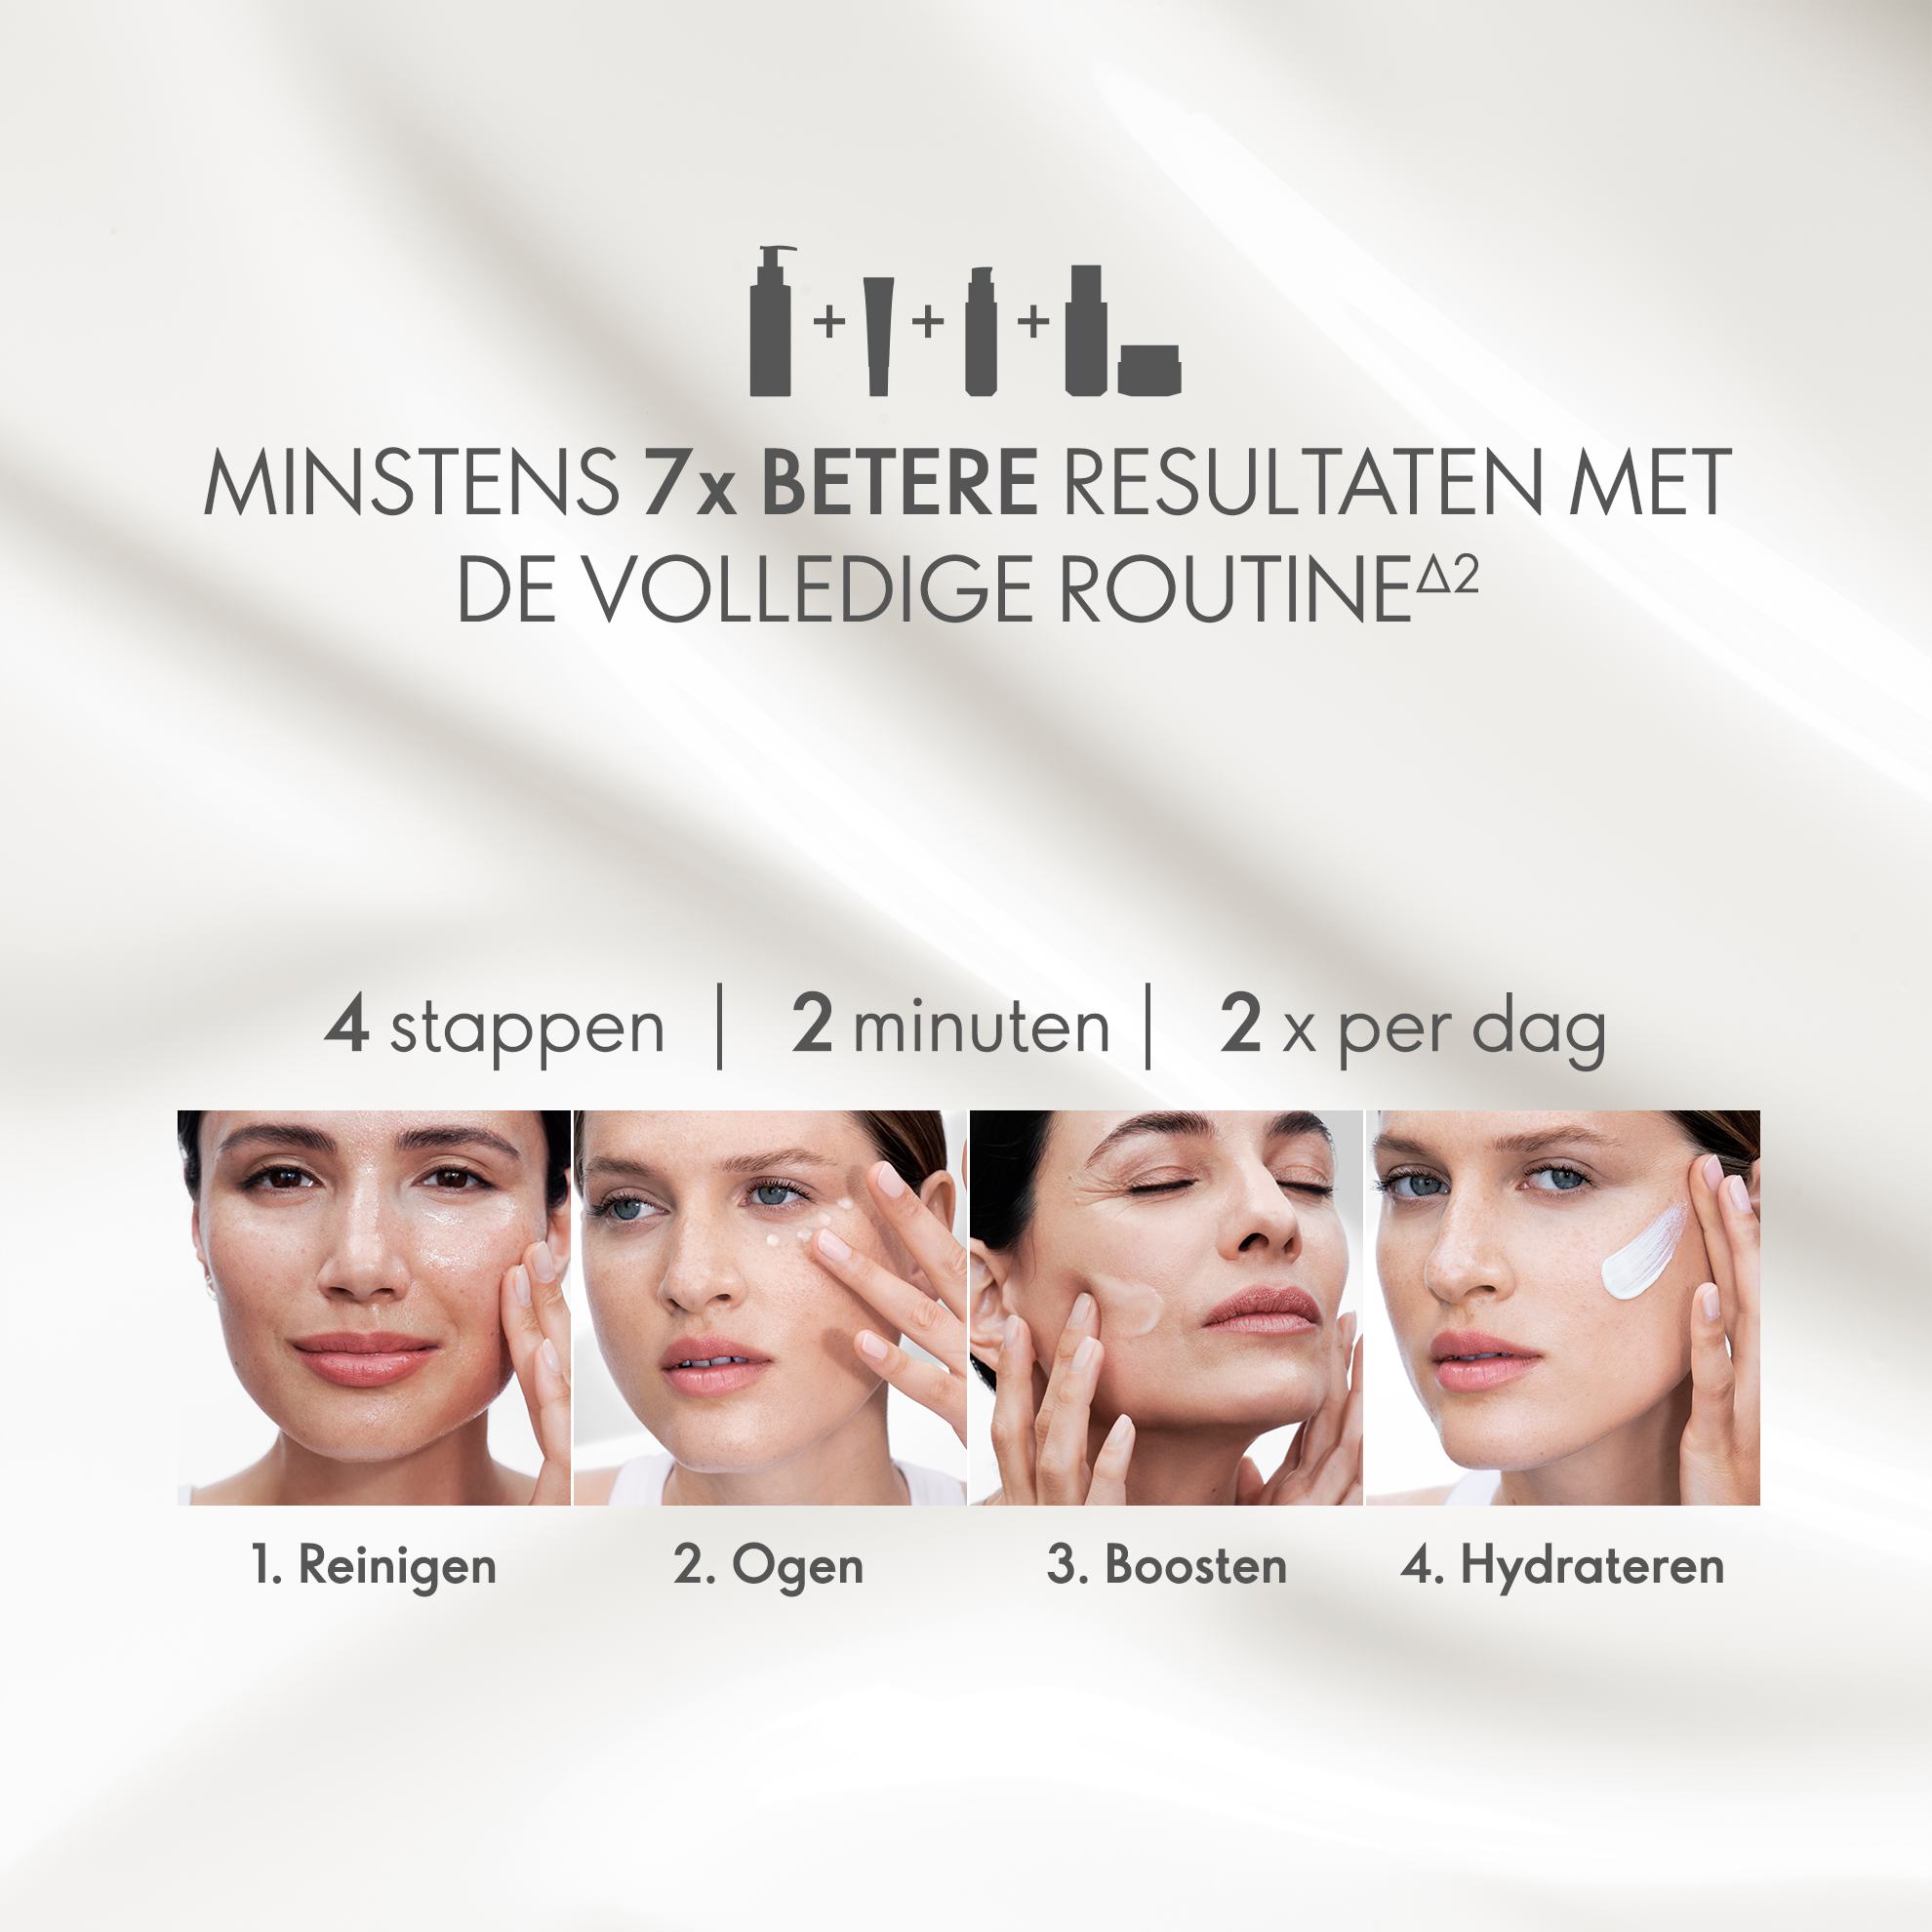 https://media-cdn.oriflame.com/productImage?externalMediaId=product-management-media%2fProducts%2f45608%2fNL%2f45608_5.png&id=17563720&version=1